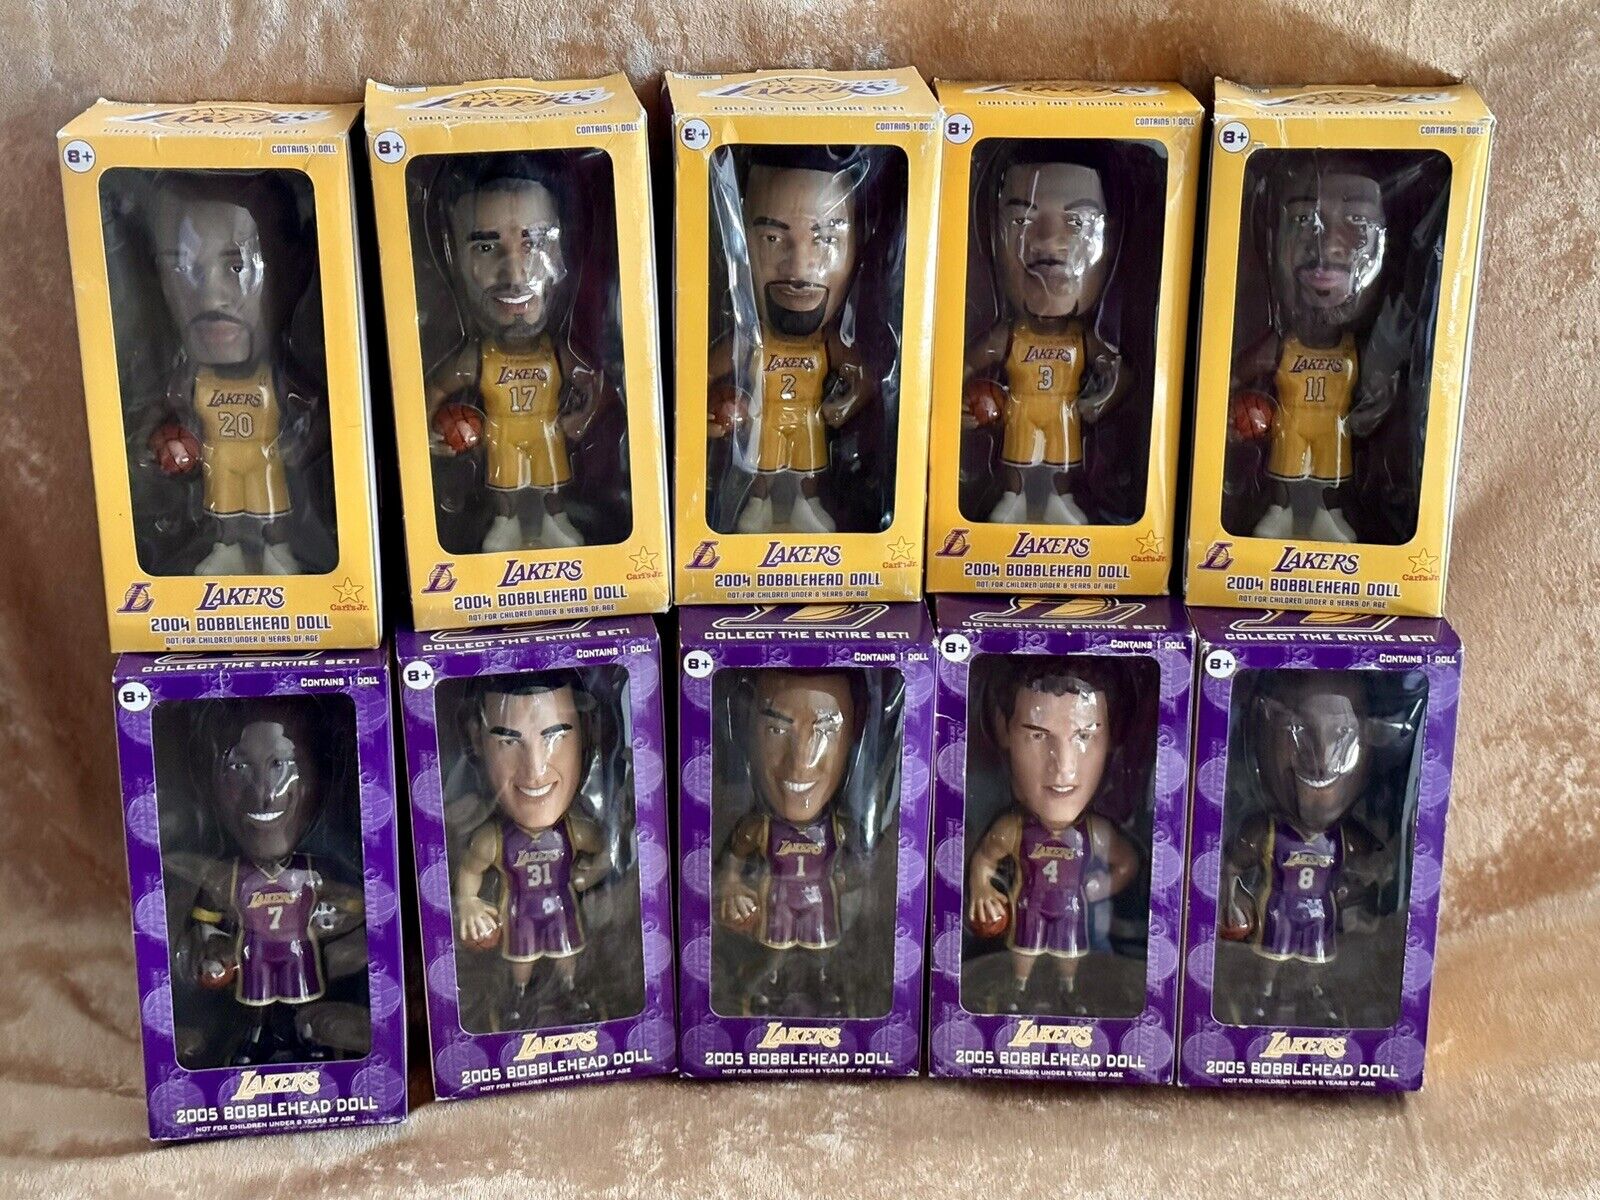 2004 & 2005 Carls Jr LAKERS Bobble heads- Lot Of 10 - Complete Sets(Kobe Bryant)